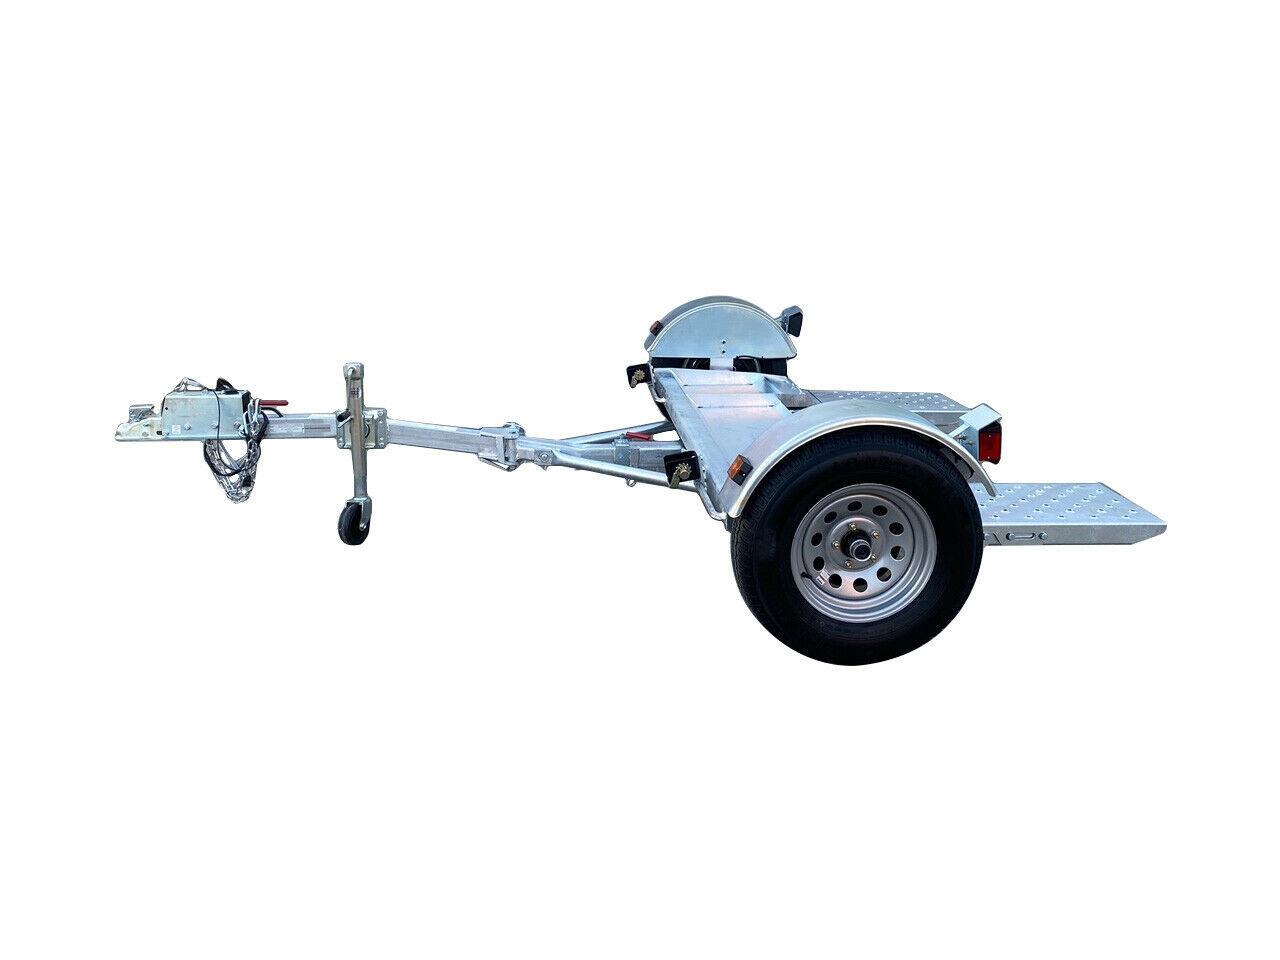 Tow Max Car Tow Dolly Trailer 4,900 lb. Used with RV